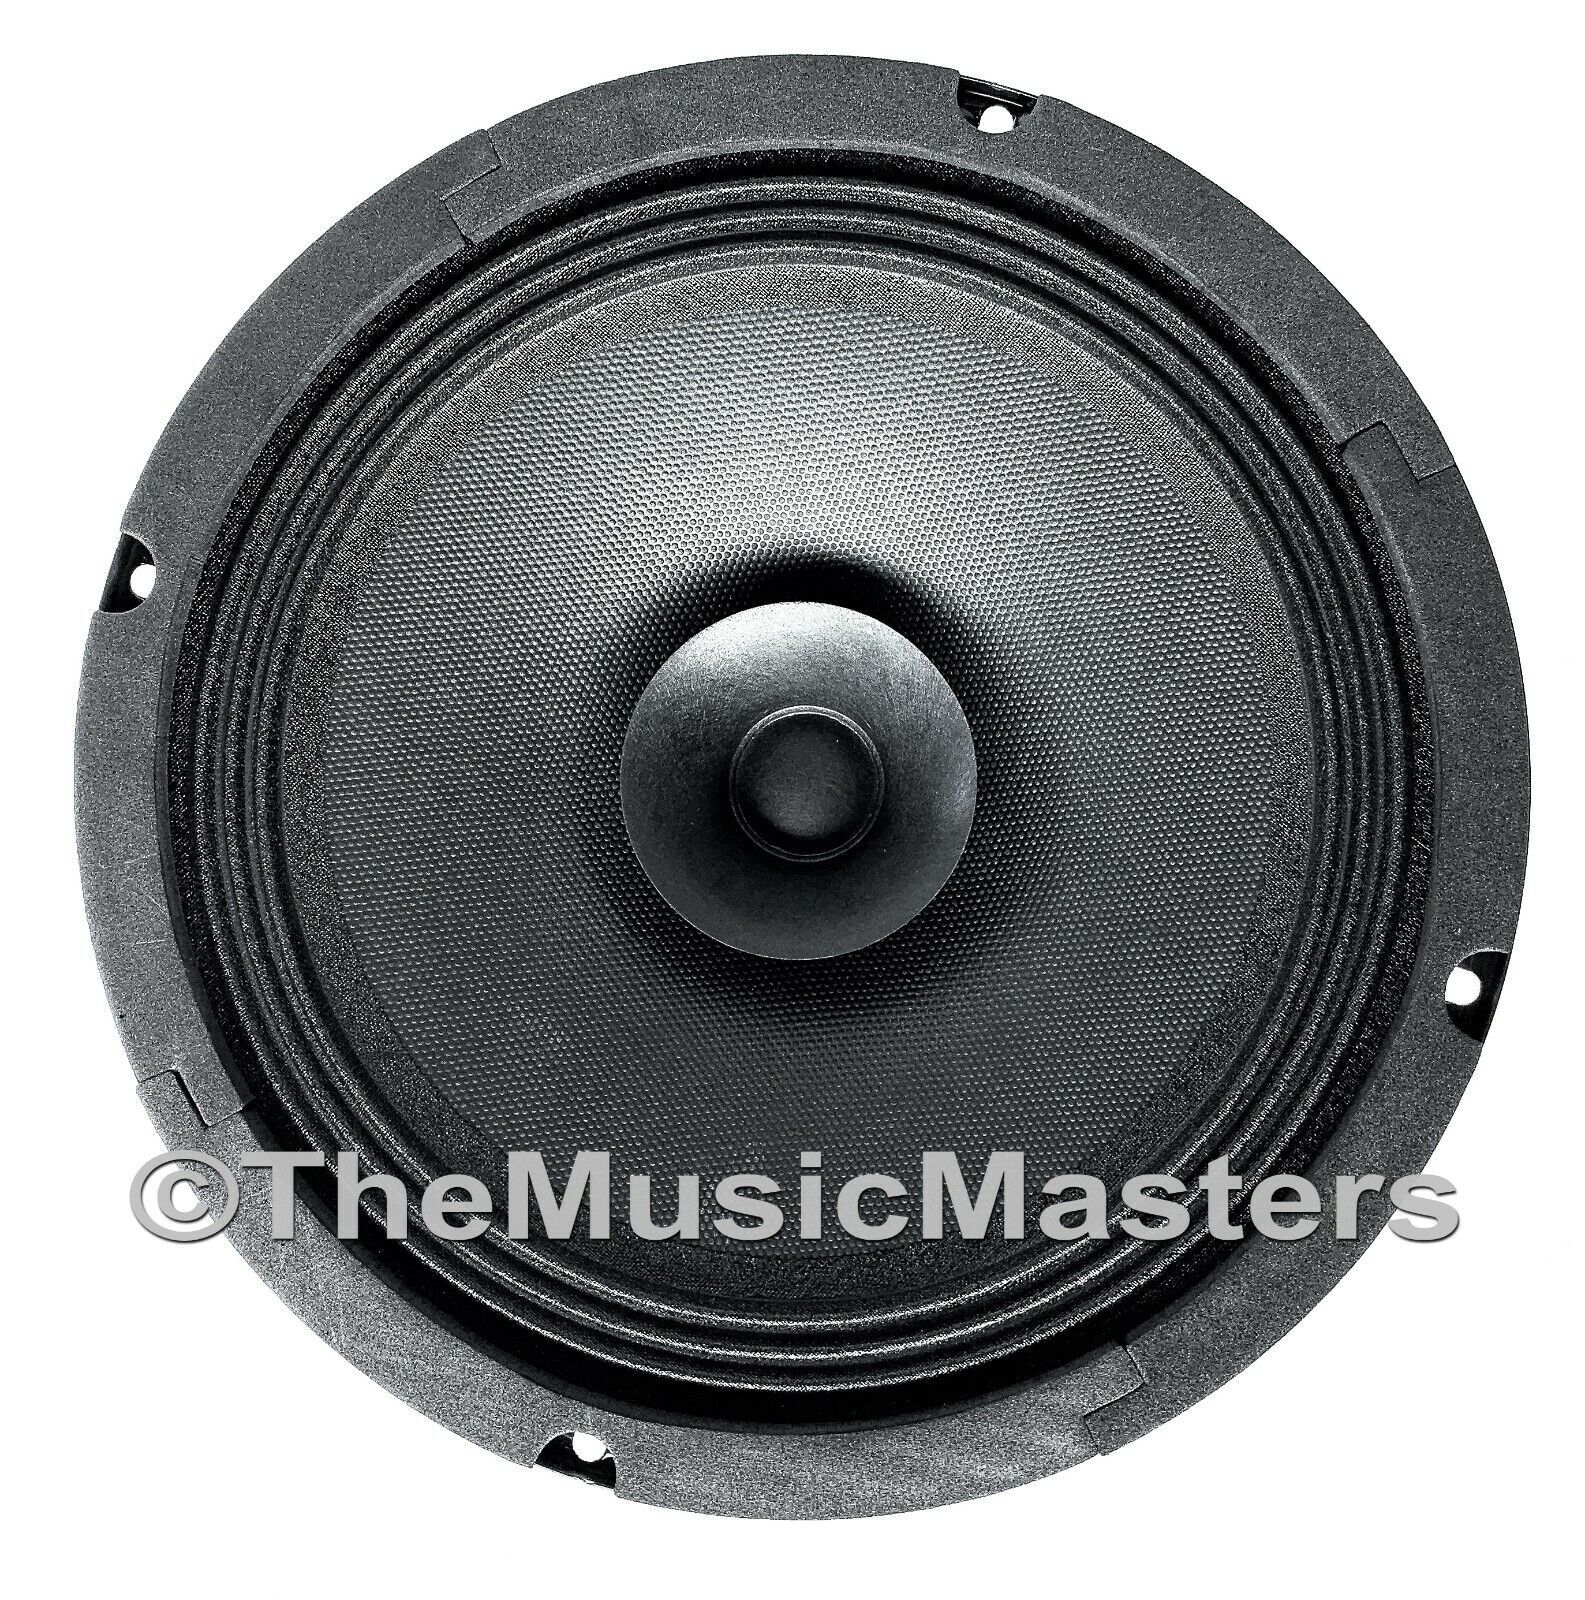 Primary image for 8 inch Full-Range Audio Speaker Bass Mid Woofer 8 ohm Home Stereo Sound Studio